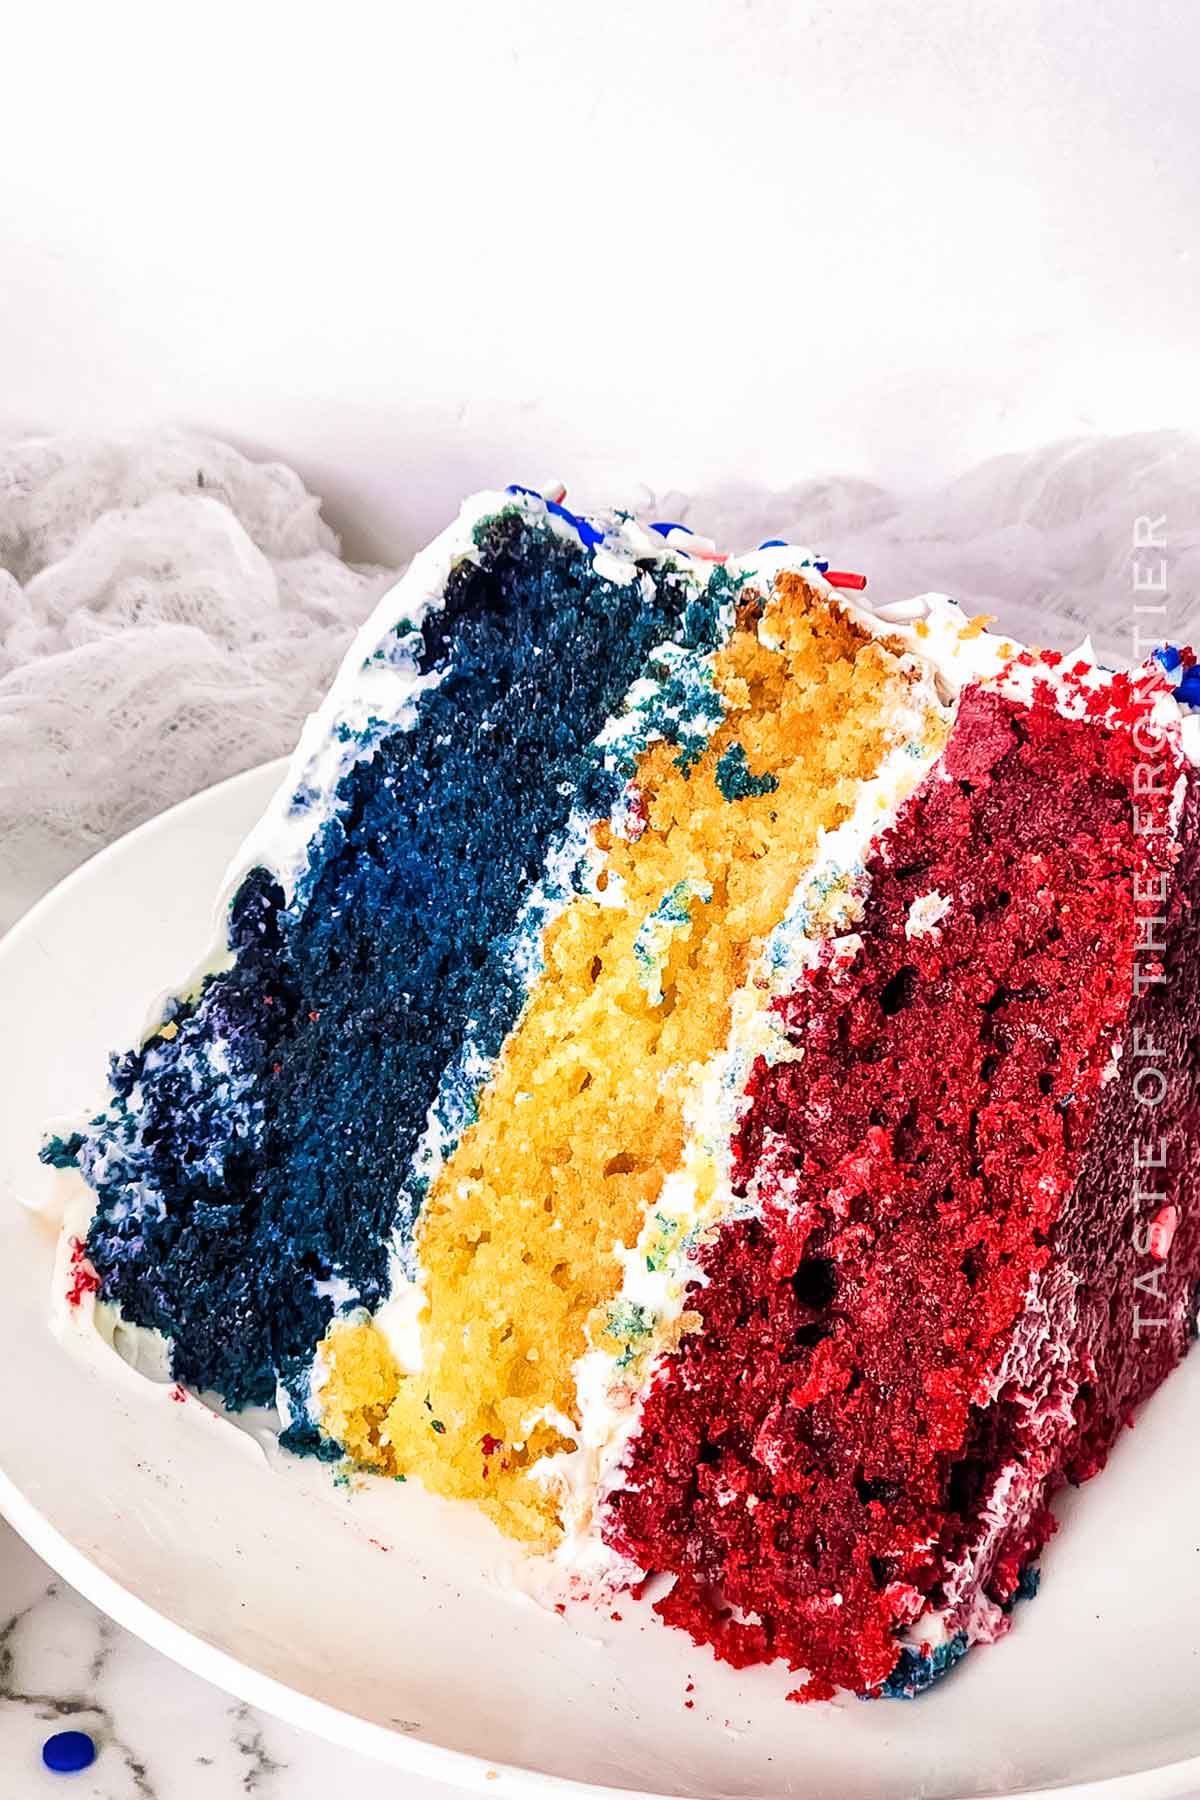 slice of cake - 3 layers different colors